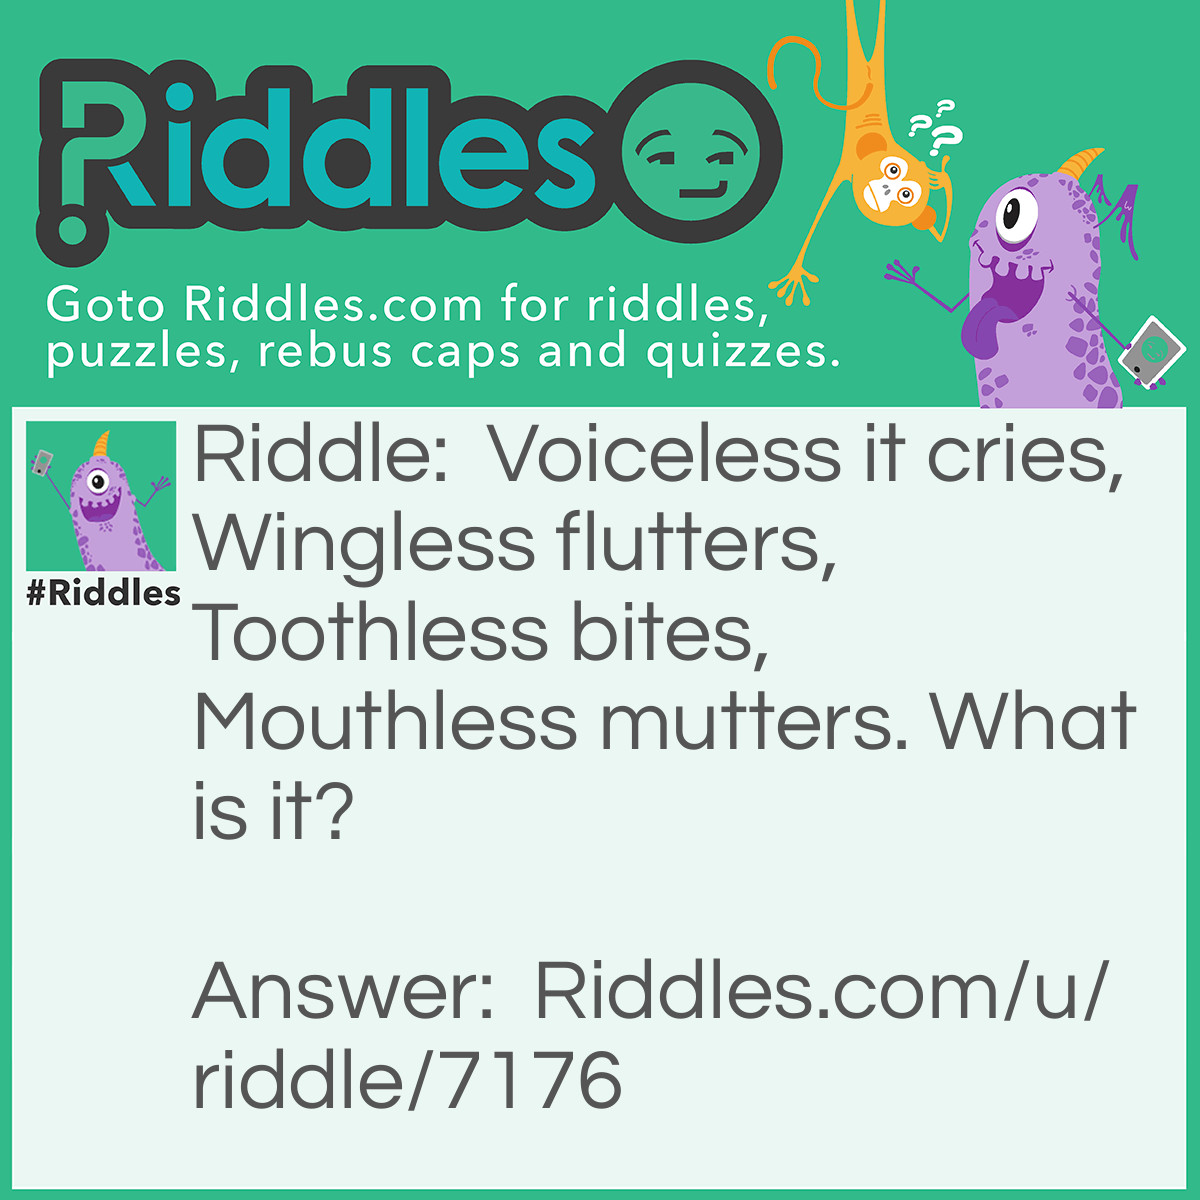 Riddle: Voiceless it cries, Wingless flutters, Toothless bites, Mouthless mutters. What is it? Answer: The wind.